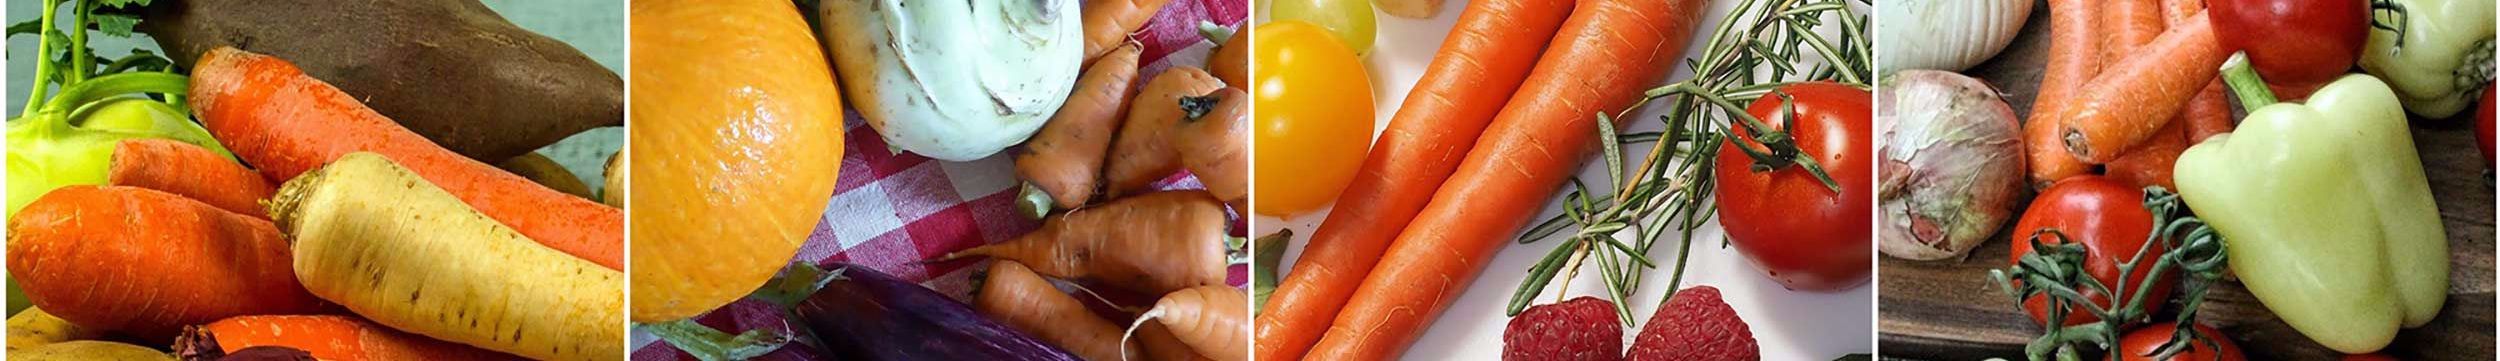 Four images of colorful fruits and vegetables